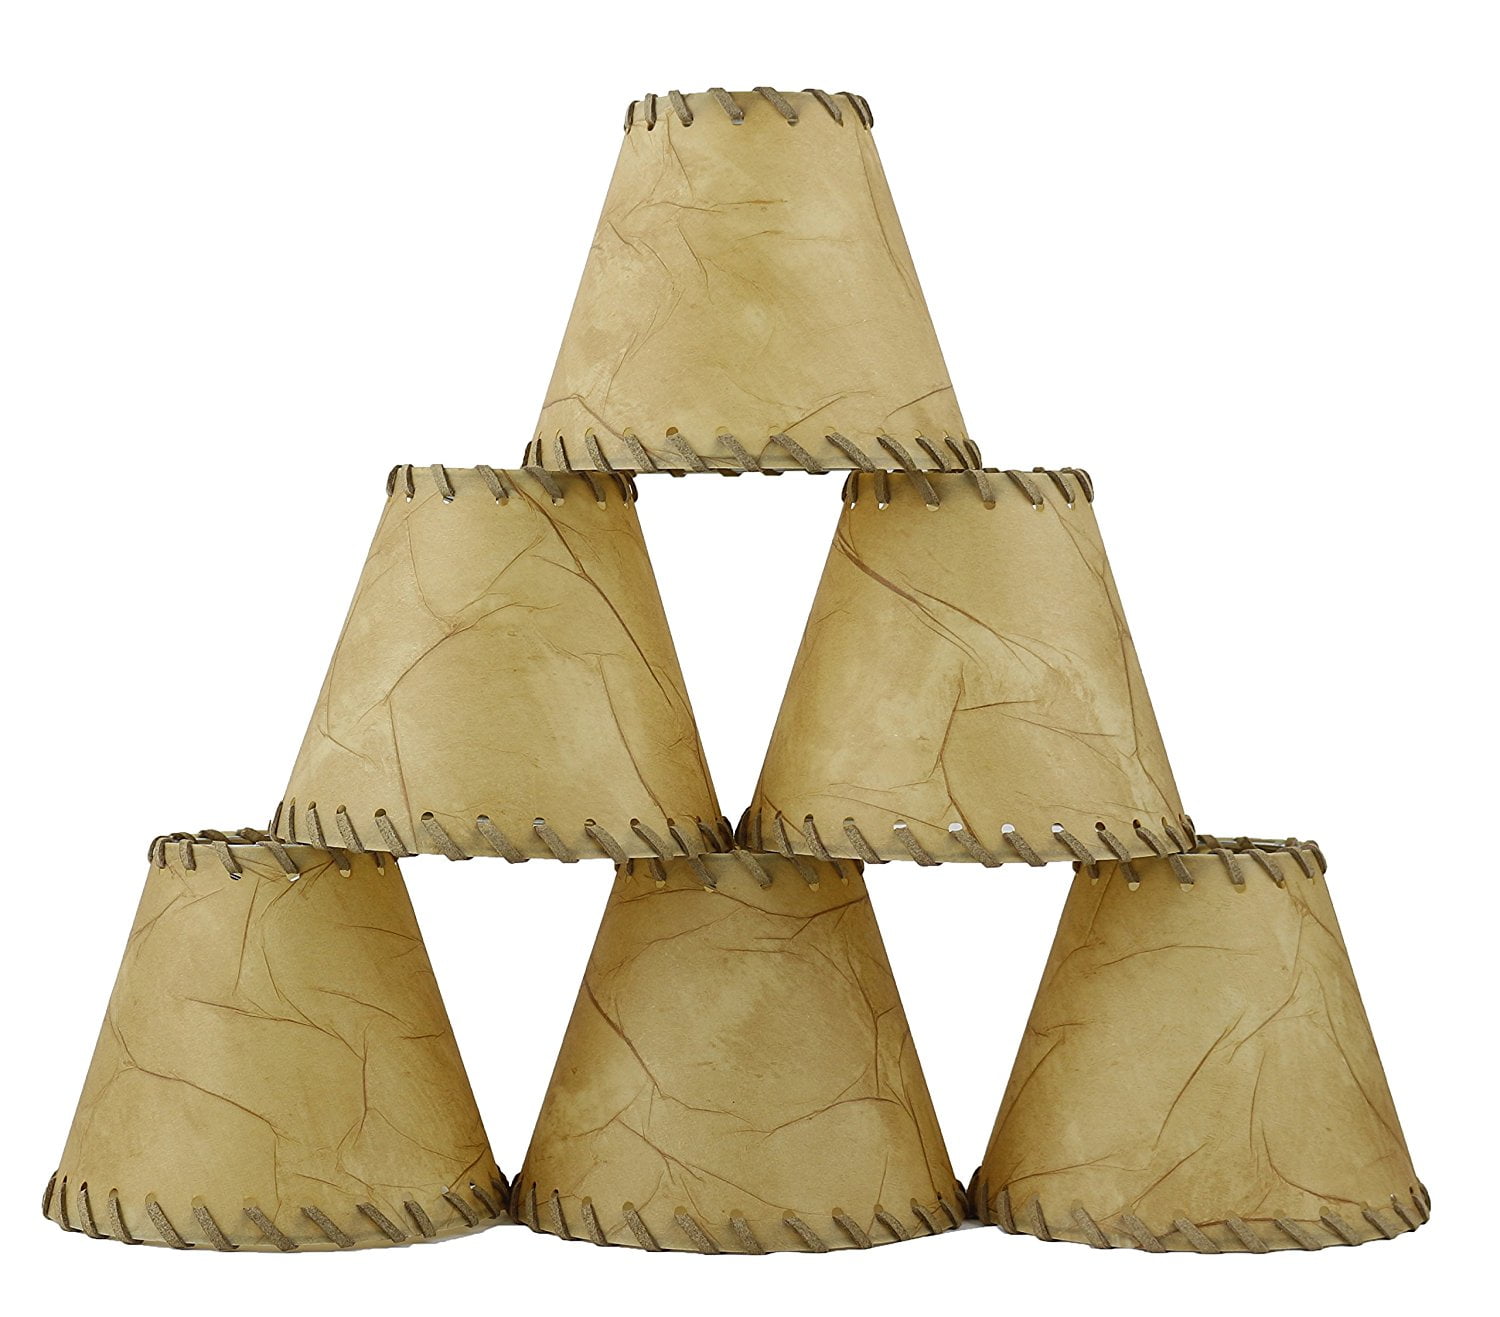 Tan Chandelier Lamp Shades Laced Faux Leather Hardback Clip On Set /4 NEW 4"x6" 